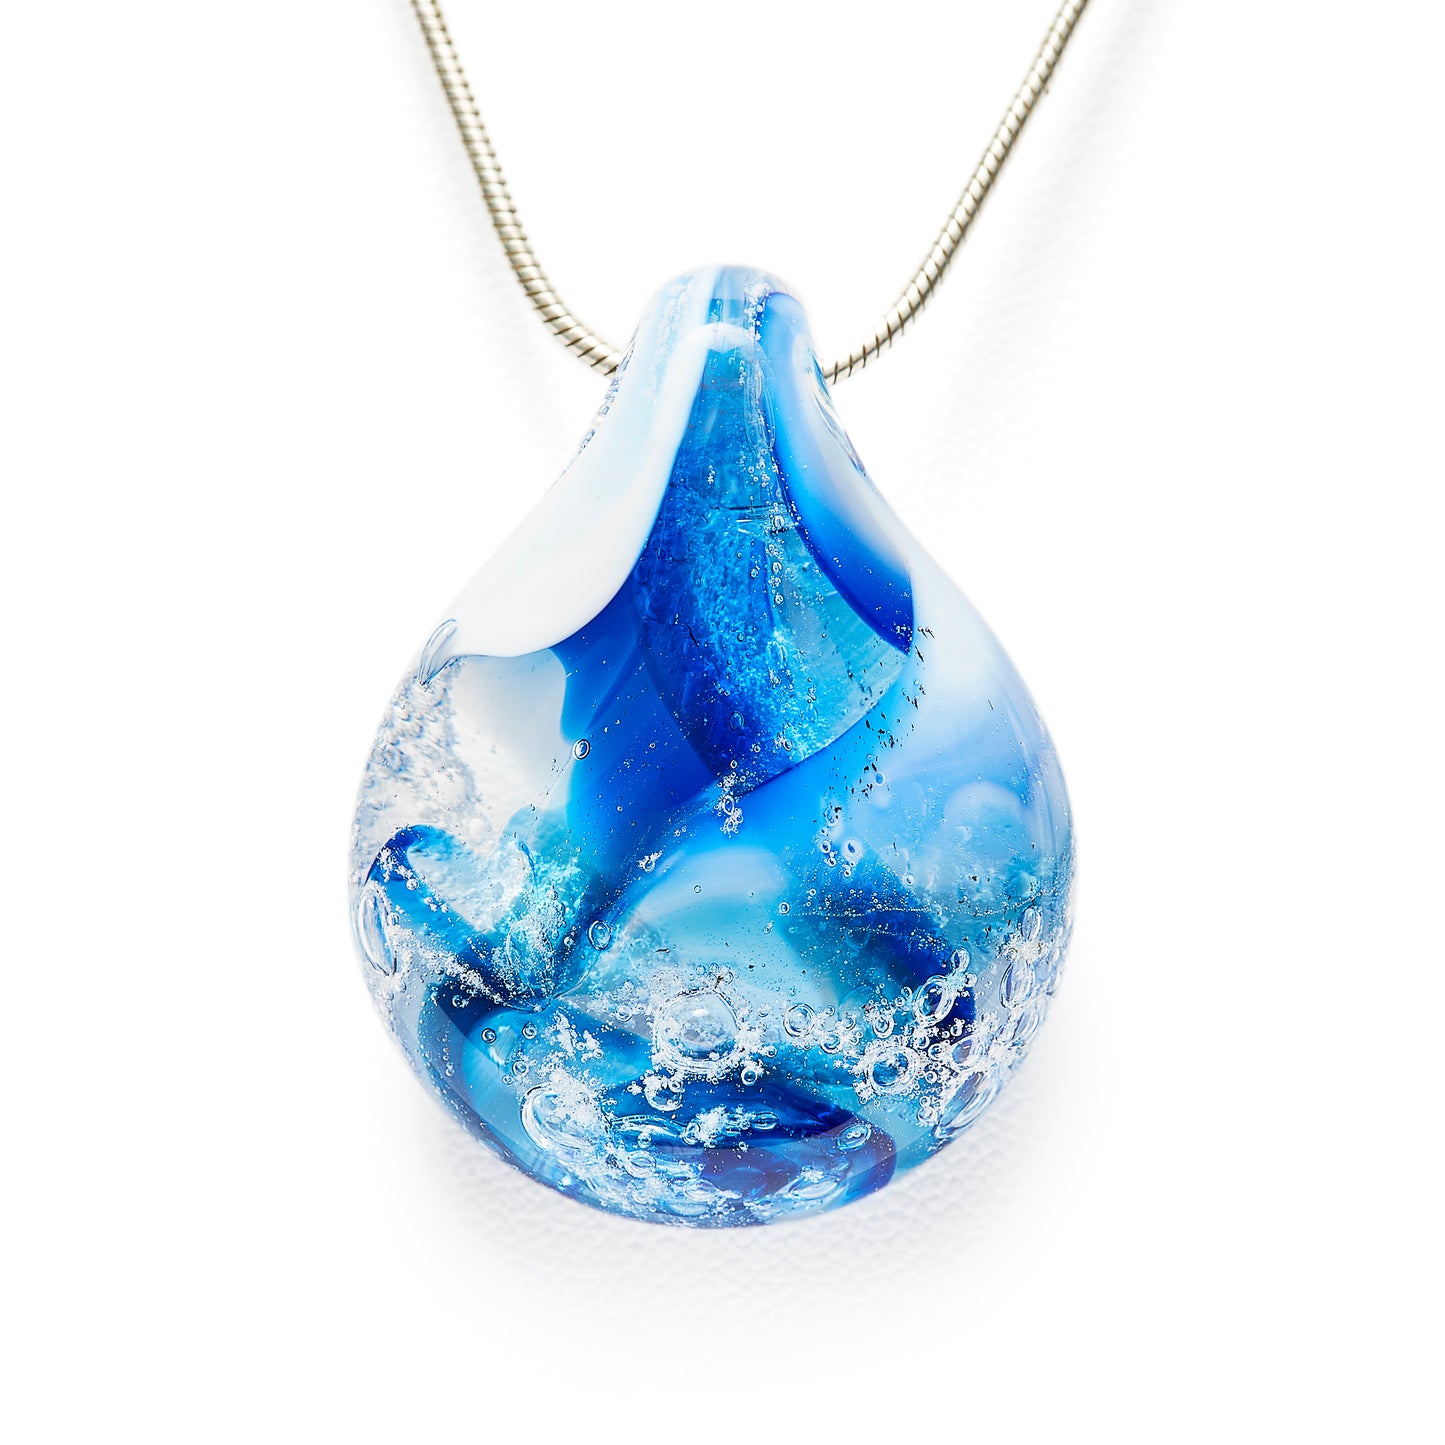 Memorial glass art pendant with cremation ash. Cobalt blue, teal blue, and white glass. Colour combination is called "Winter."